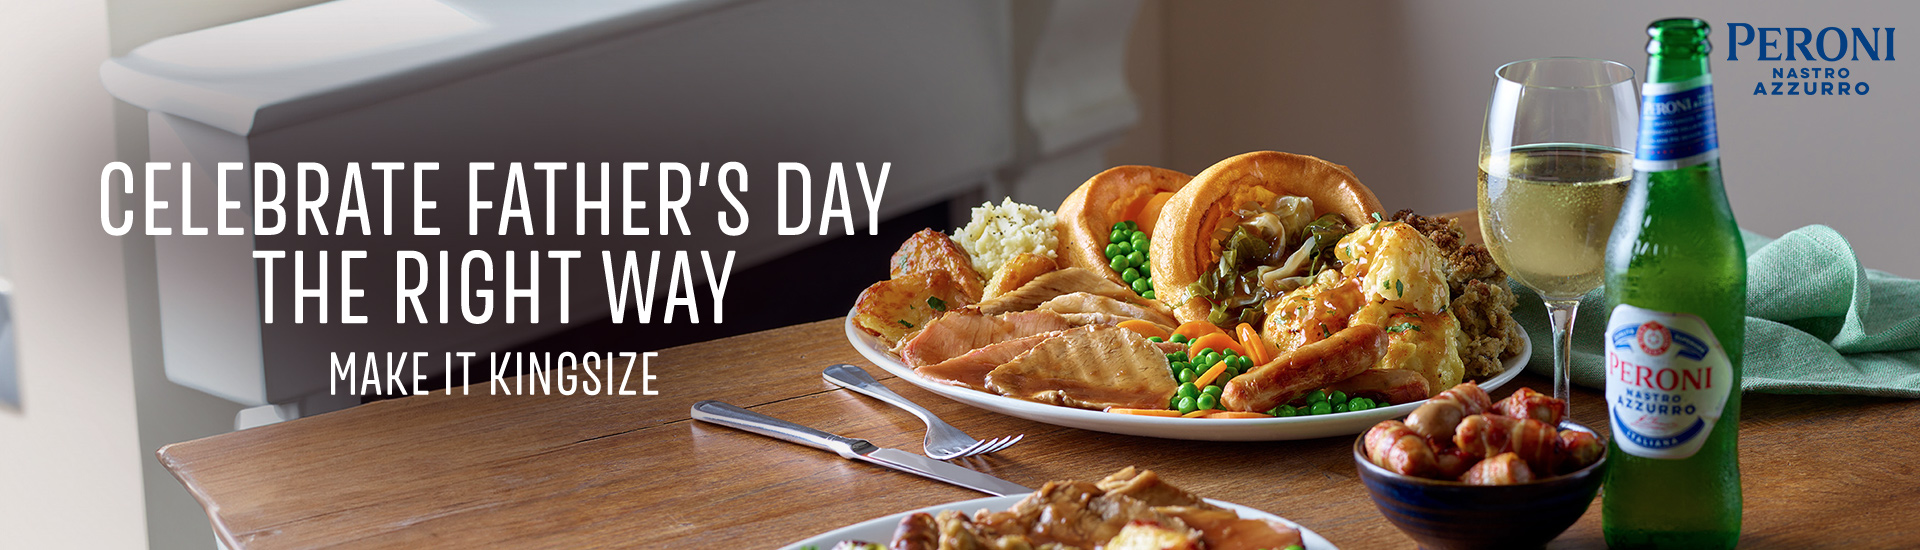 Father’s day carvery in Exeter